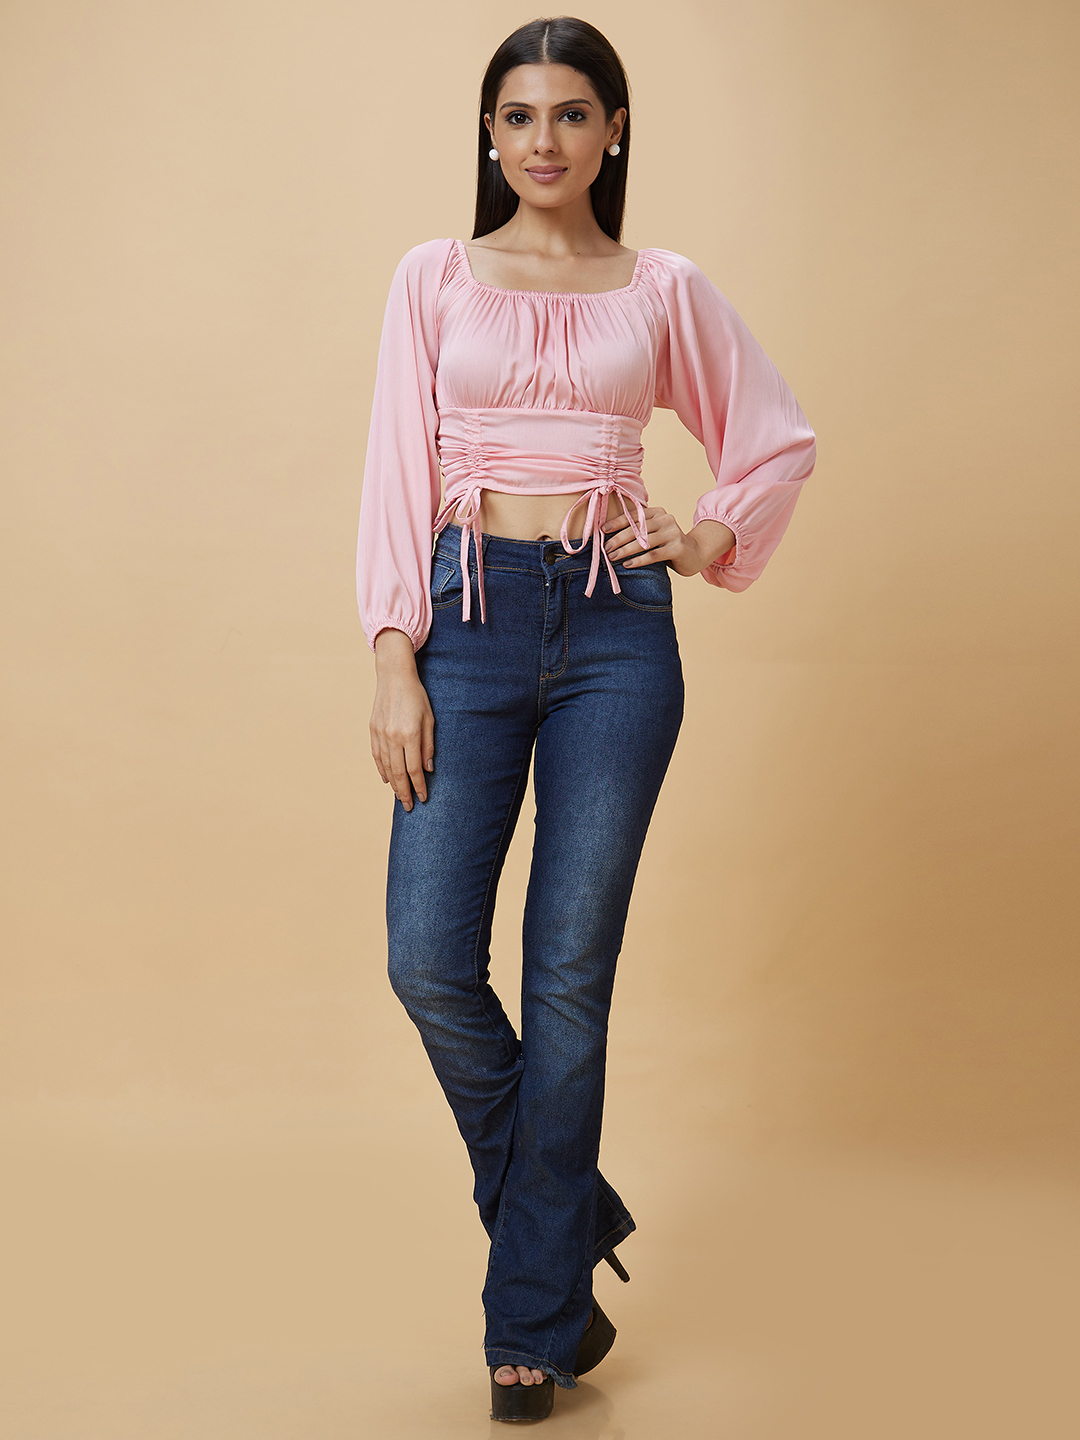 Globus Women Pink Solid Square Neck Smocking Party Crop Top